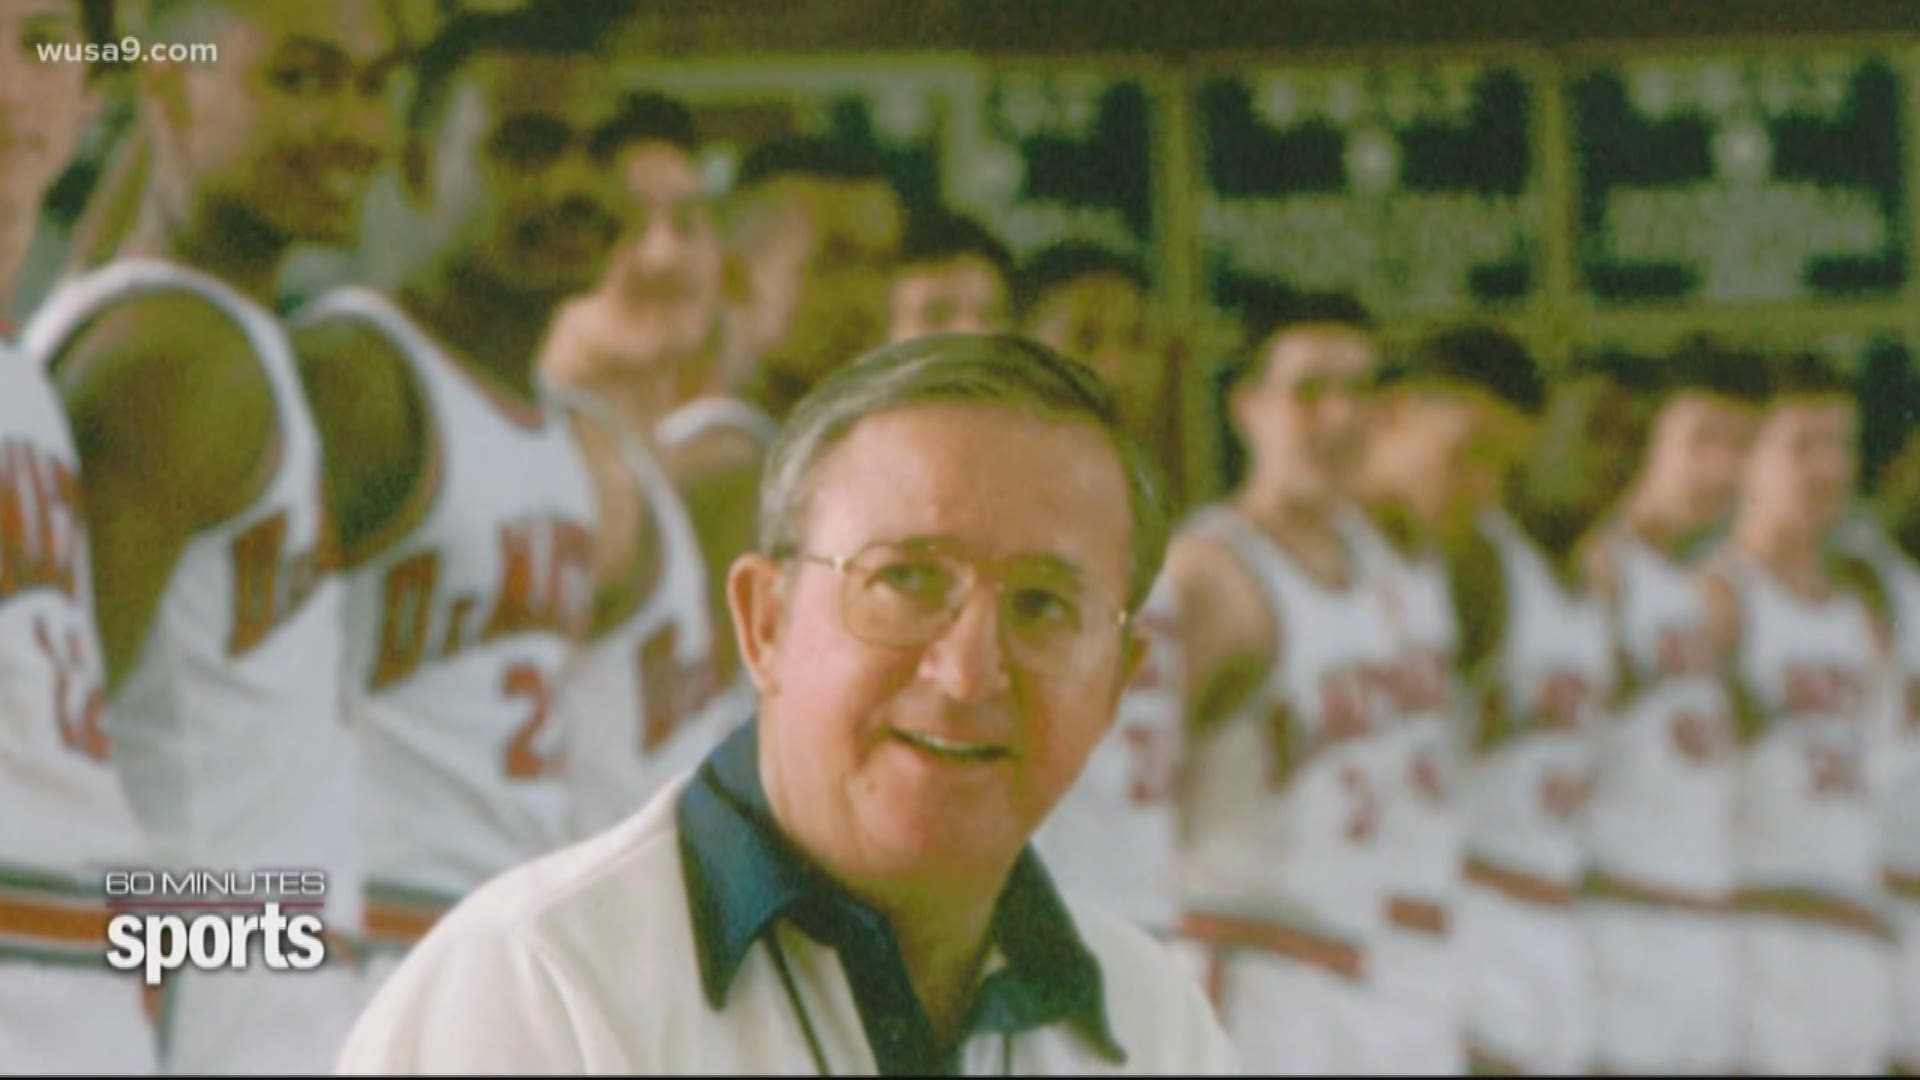 Former DeMatha Catholic High School basketball coach Morgan Wootten has died, his family said early Wednesday morning. He was 88 years old.